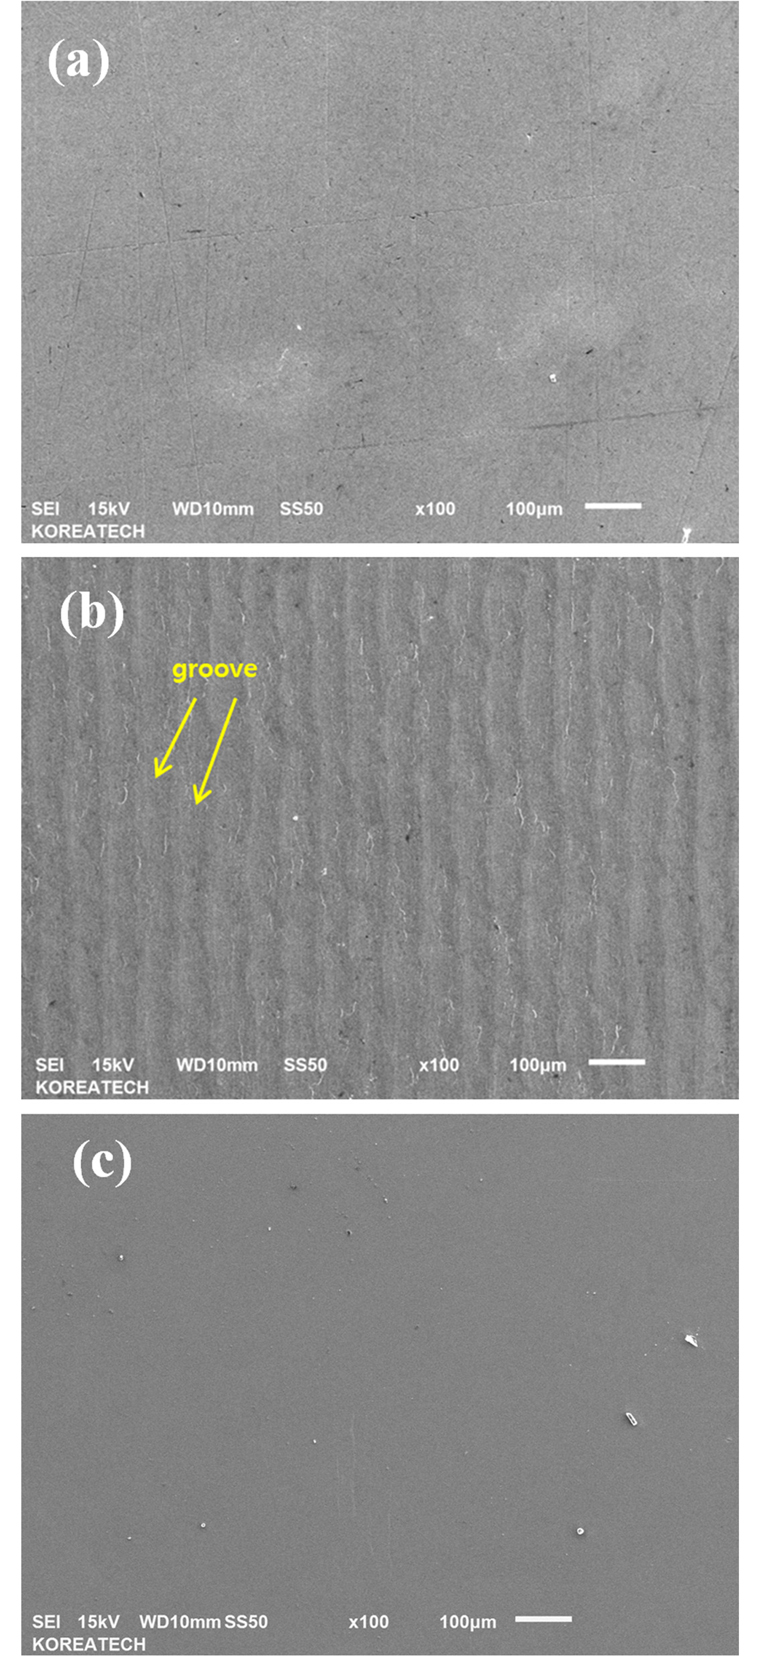 SEM image of the untreated (a), and UNSM-treated (b) and counter specimens (c).